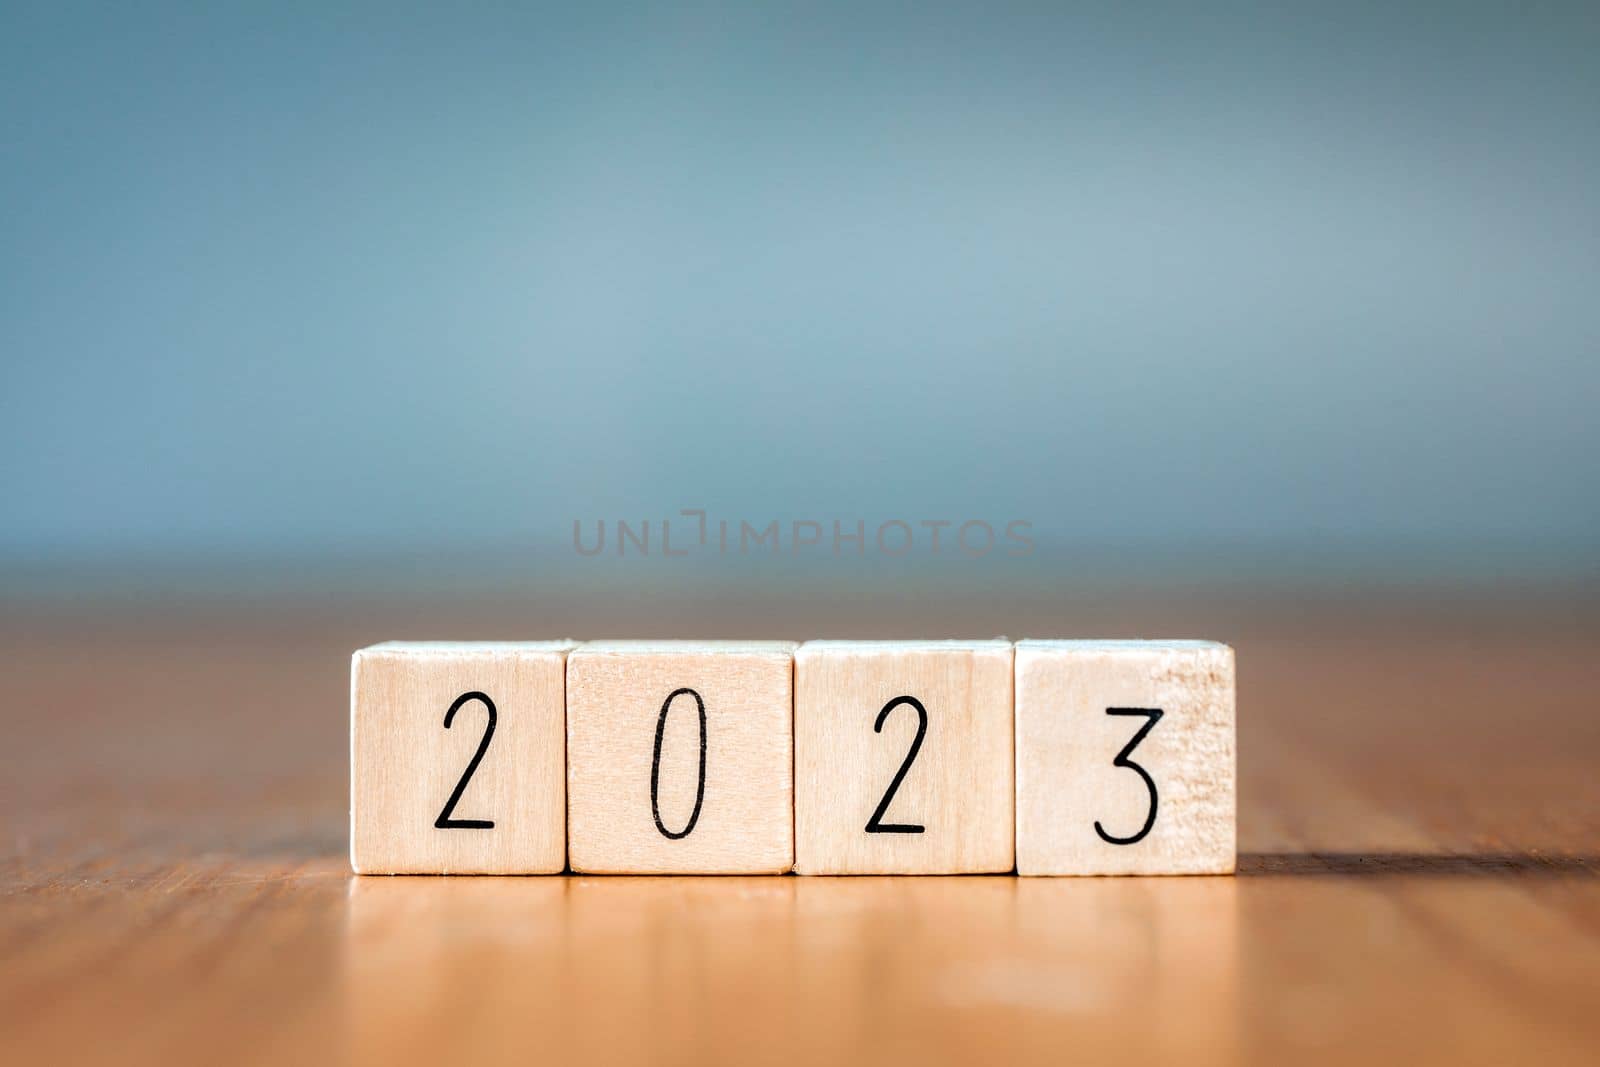 2023 New Year. wooden blocks 2023 on blue background. Start new year 2023 with goal plan, goal concept, action plan, strategy, new year business vision. copy space close up